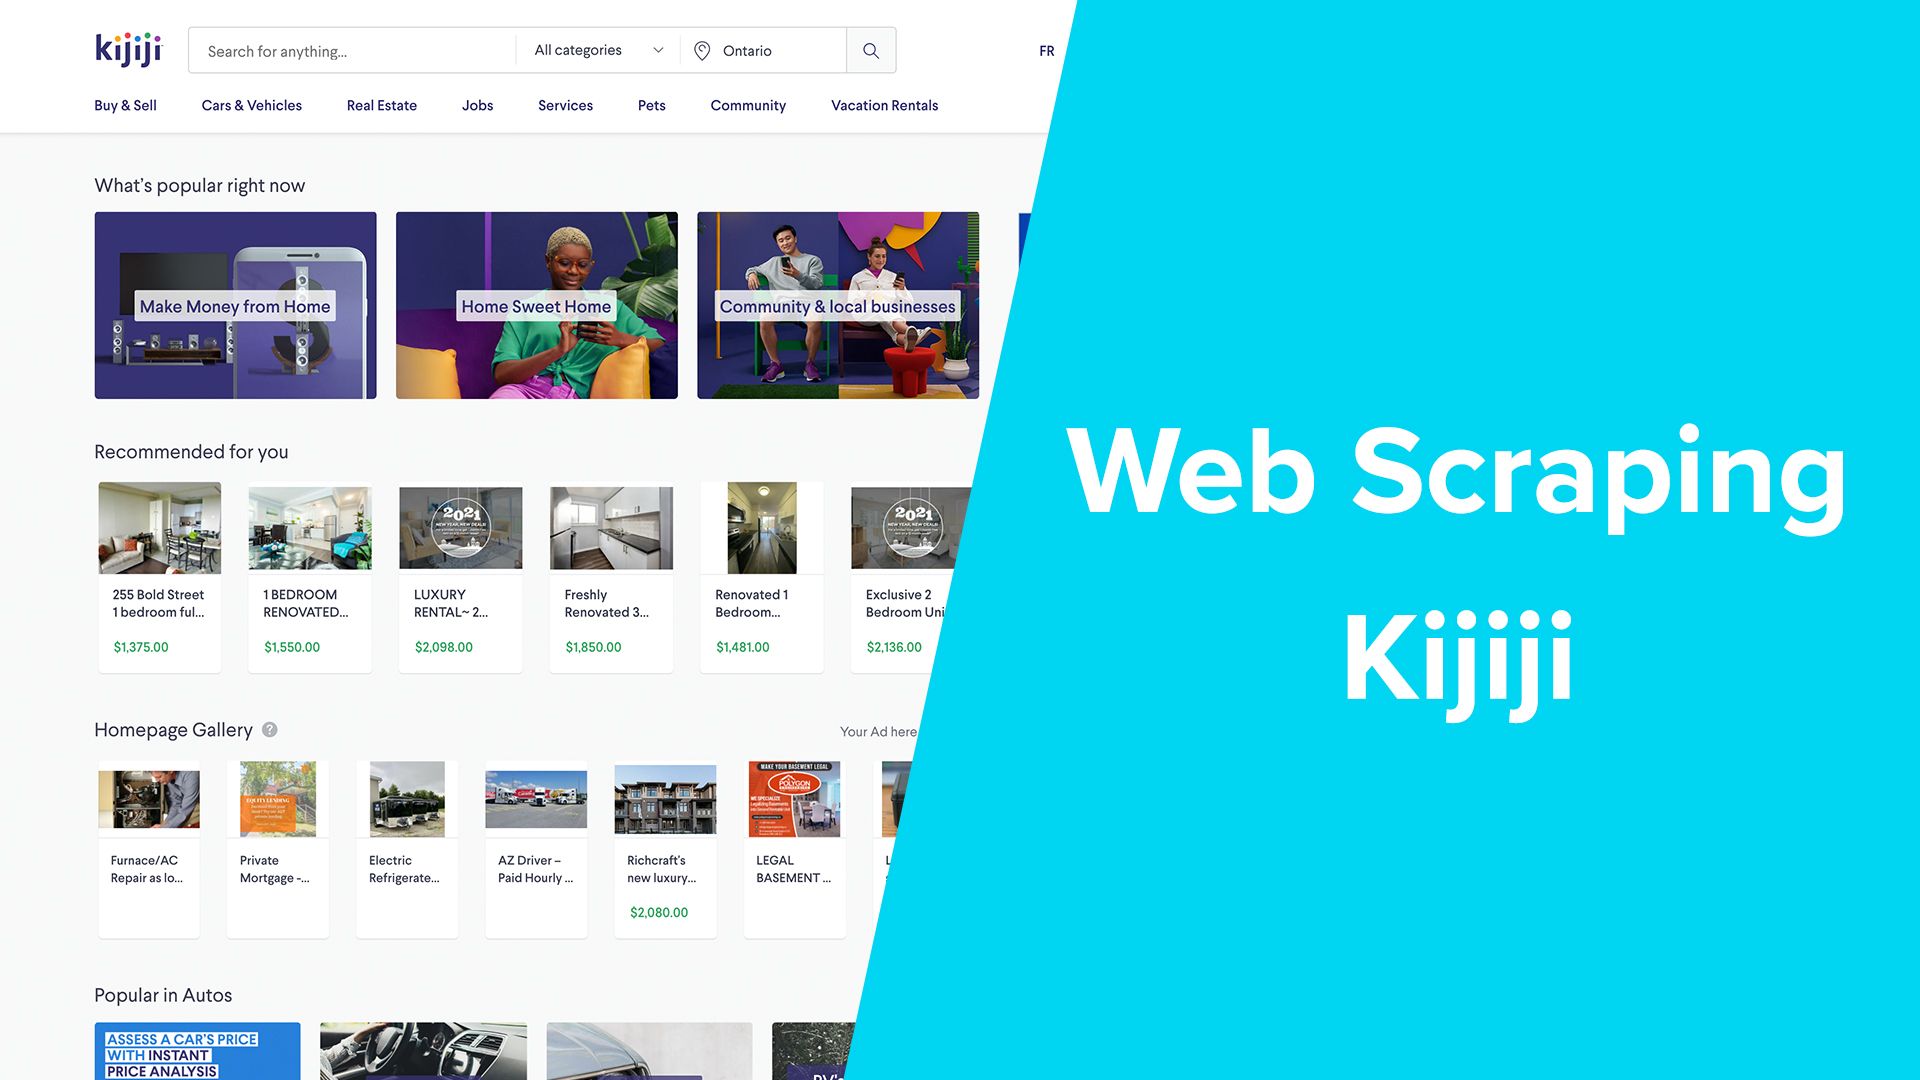 Web scraping Kijiji | extracting price, location, and description of items for sale